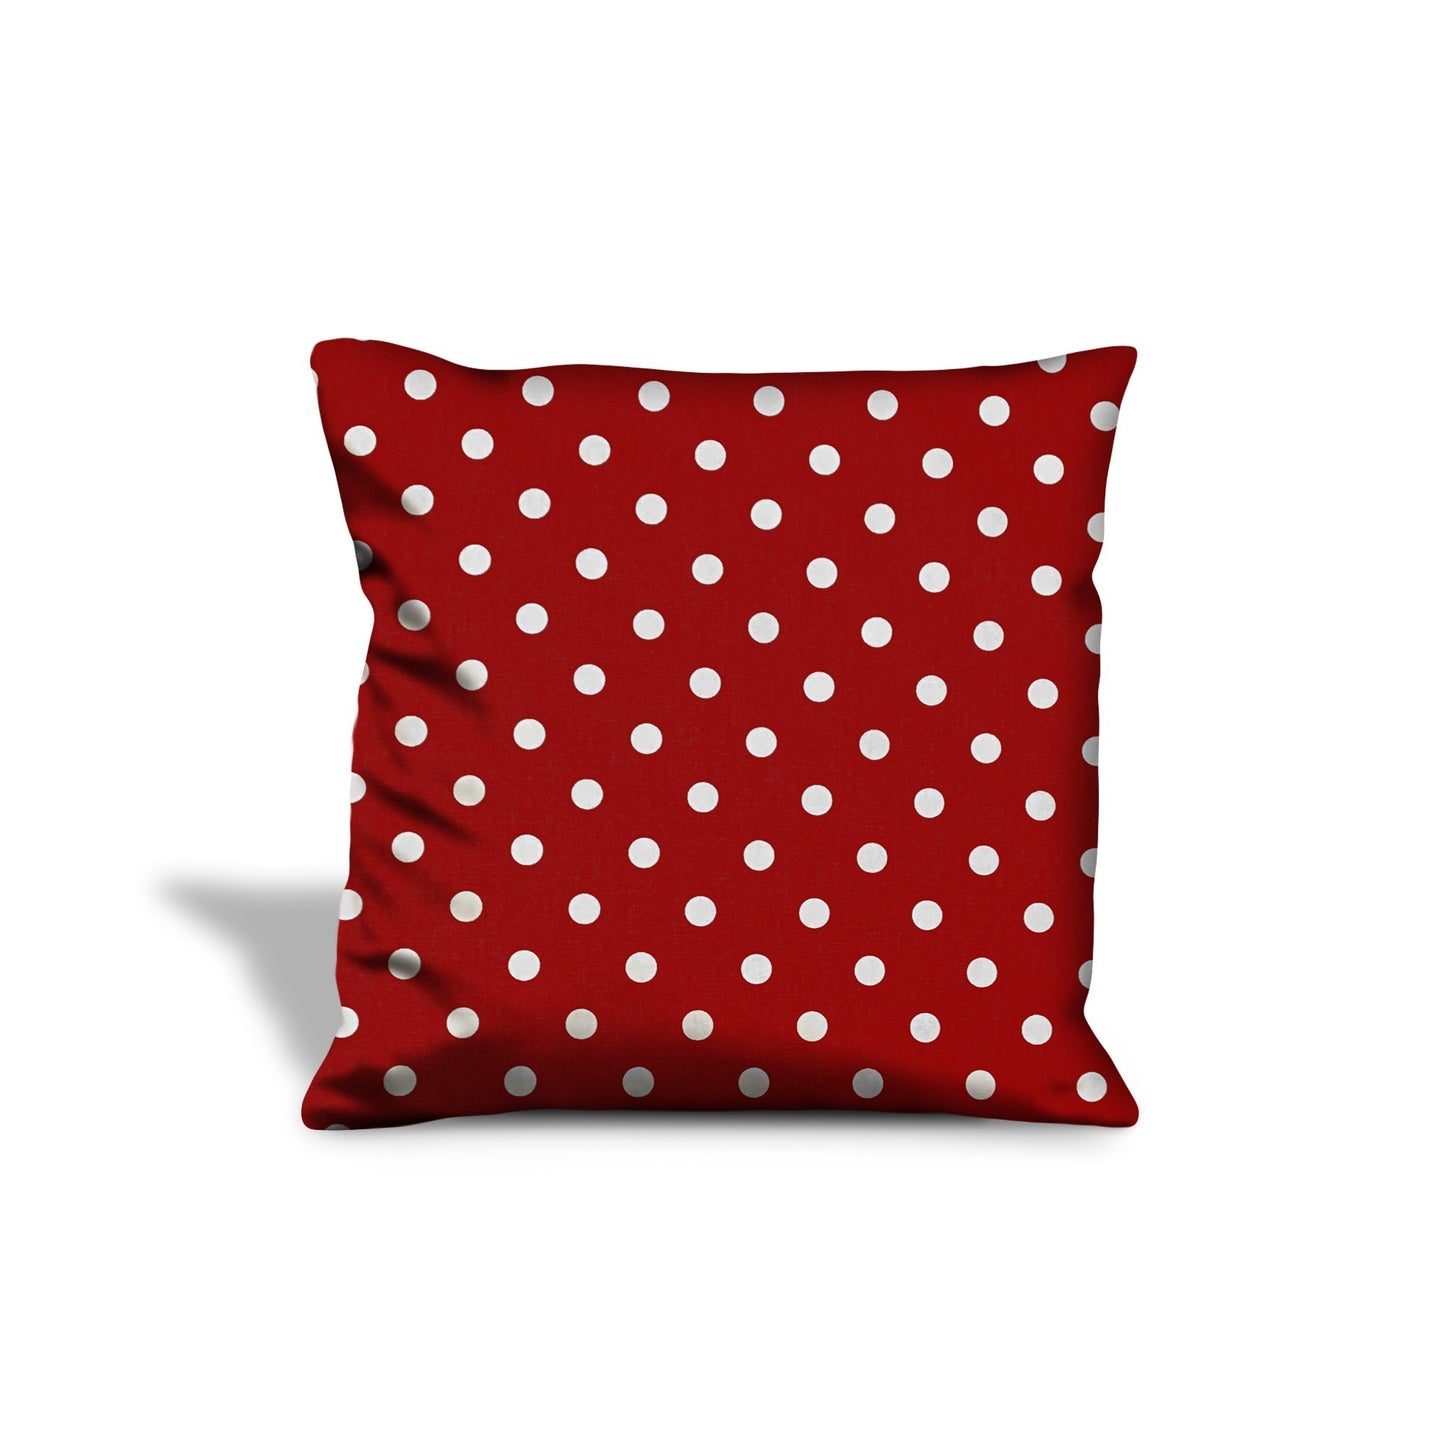 17" X 17" Red And White Zippered 100% Cotton Polka Dots Throw Pillow Cover